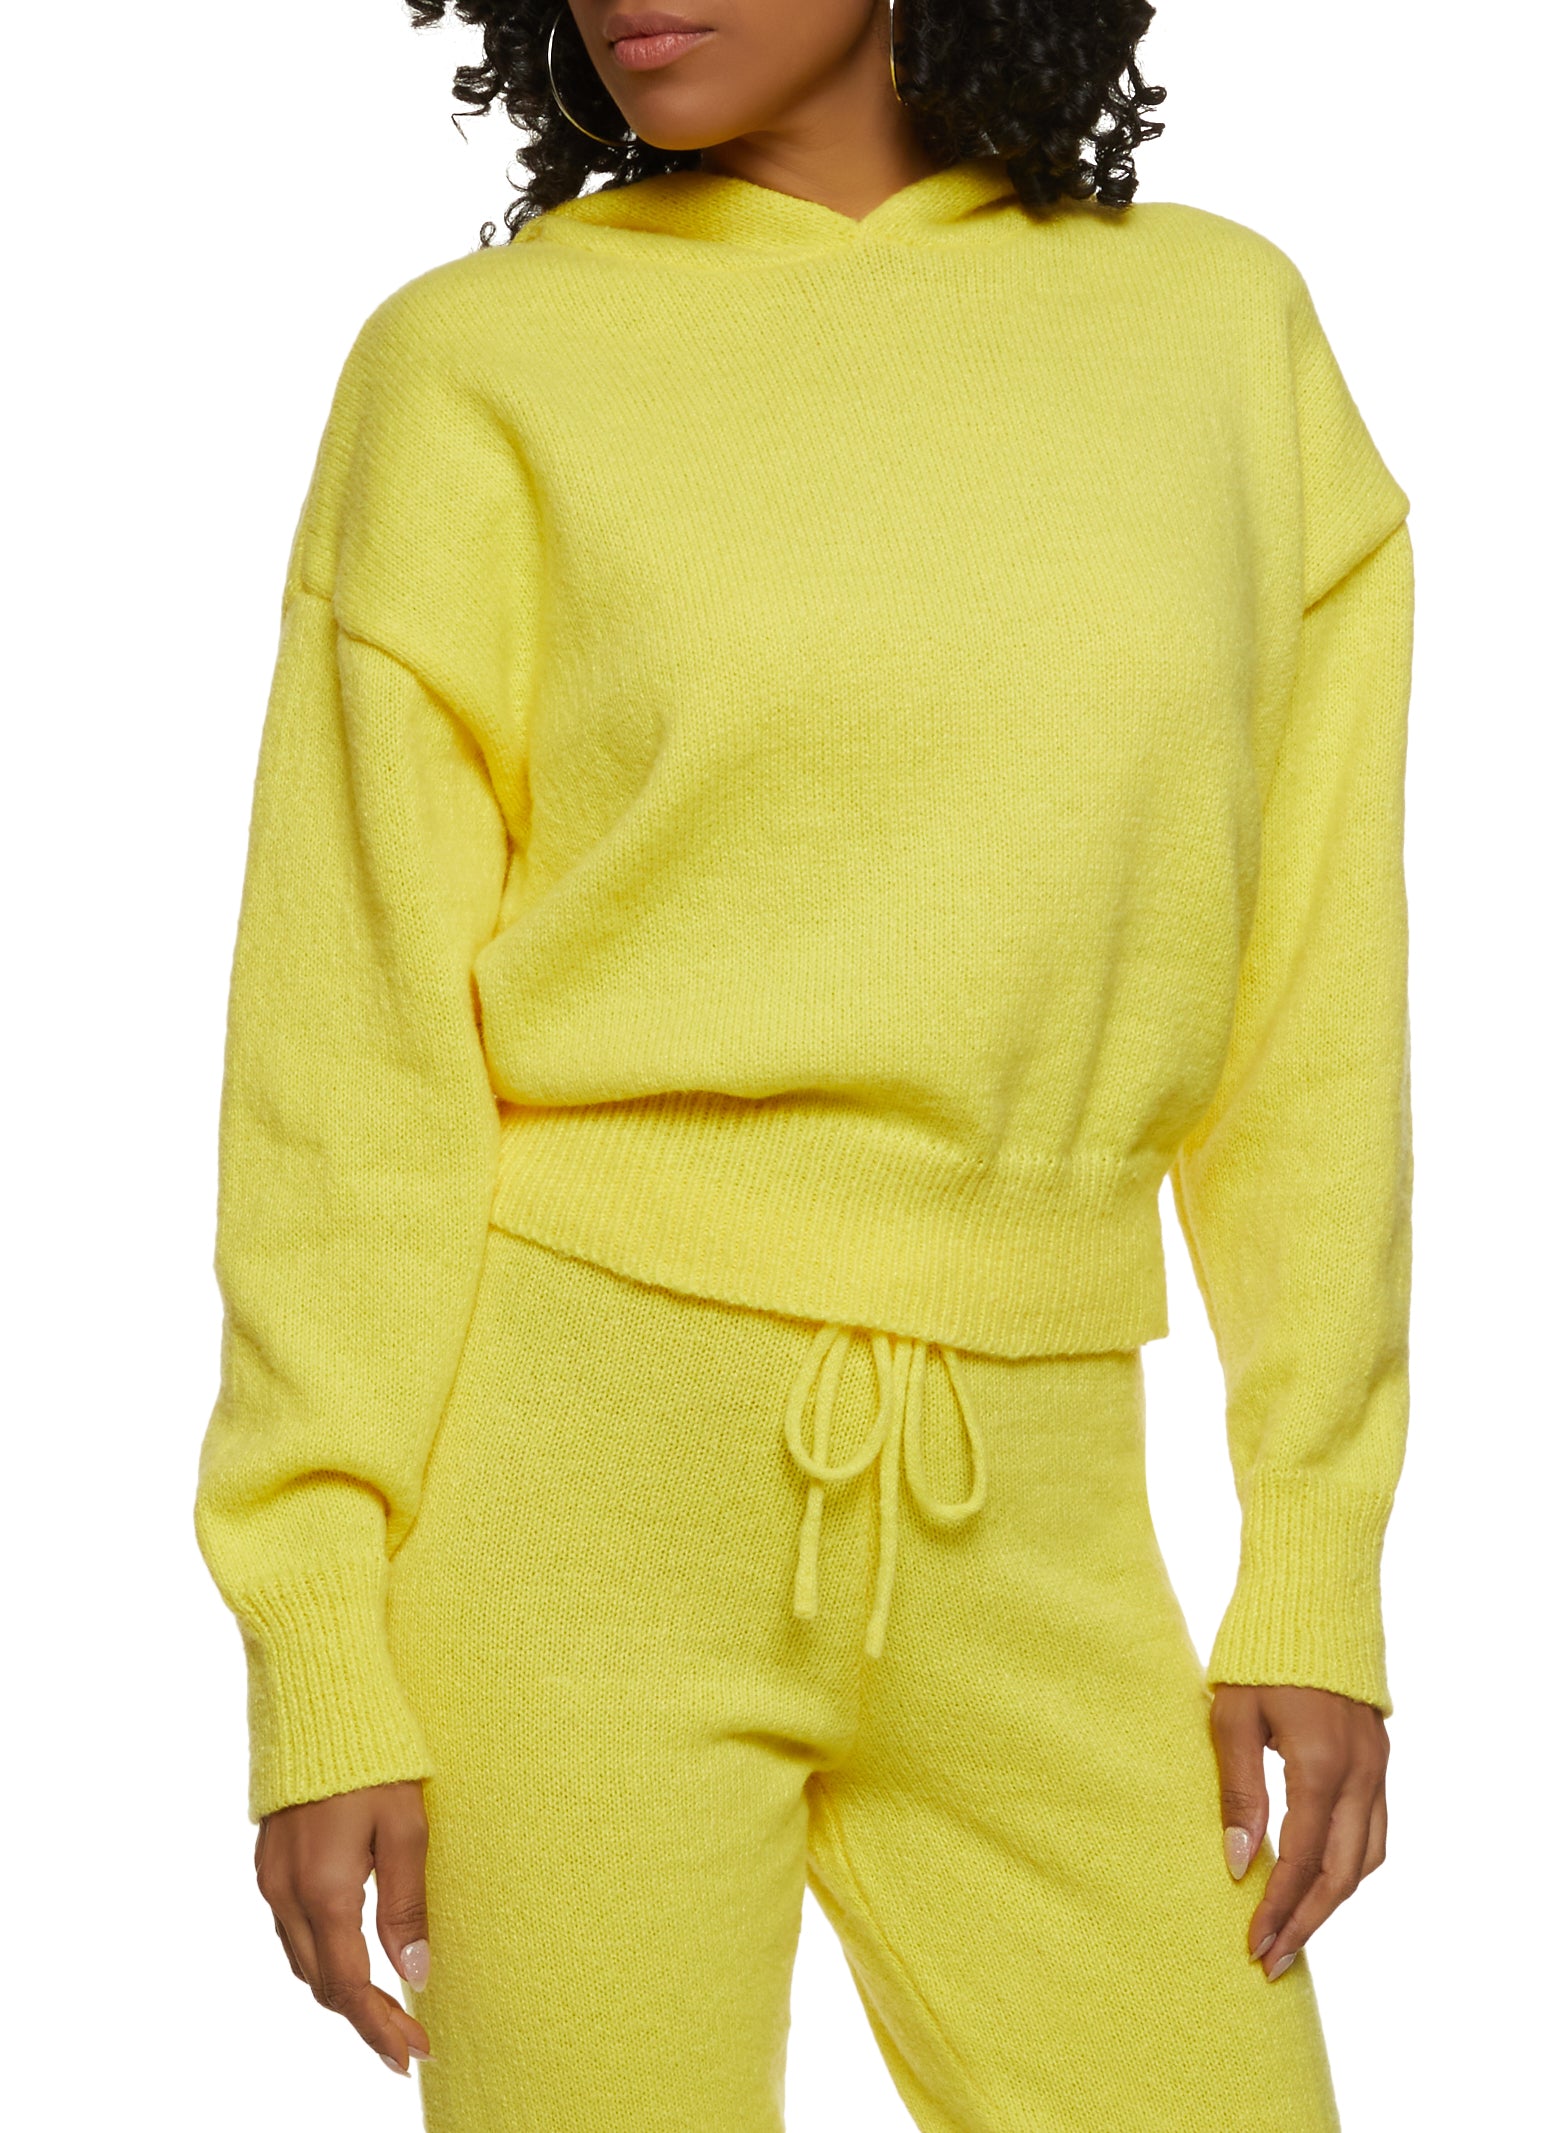 Womens Brushed Knit Hooded Sweater, Yellow, Size S